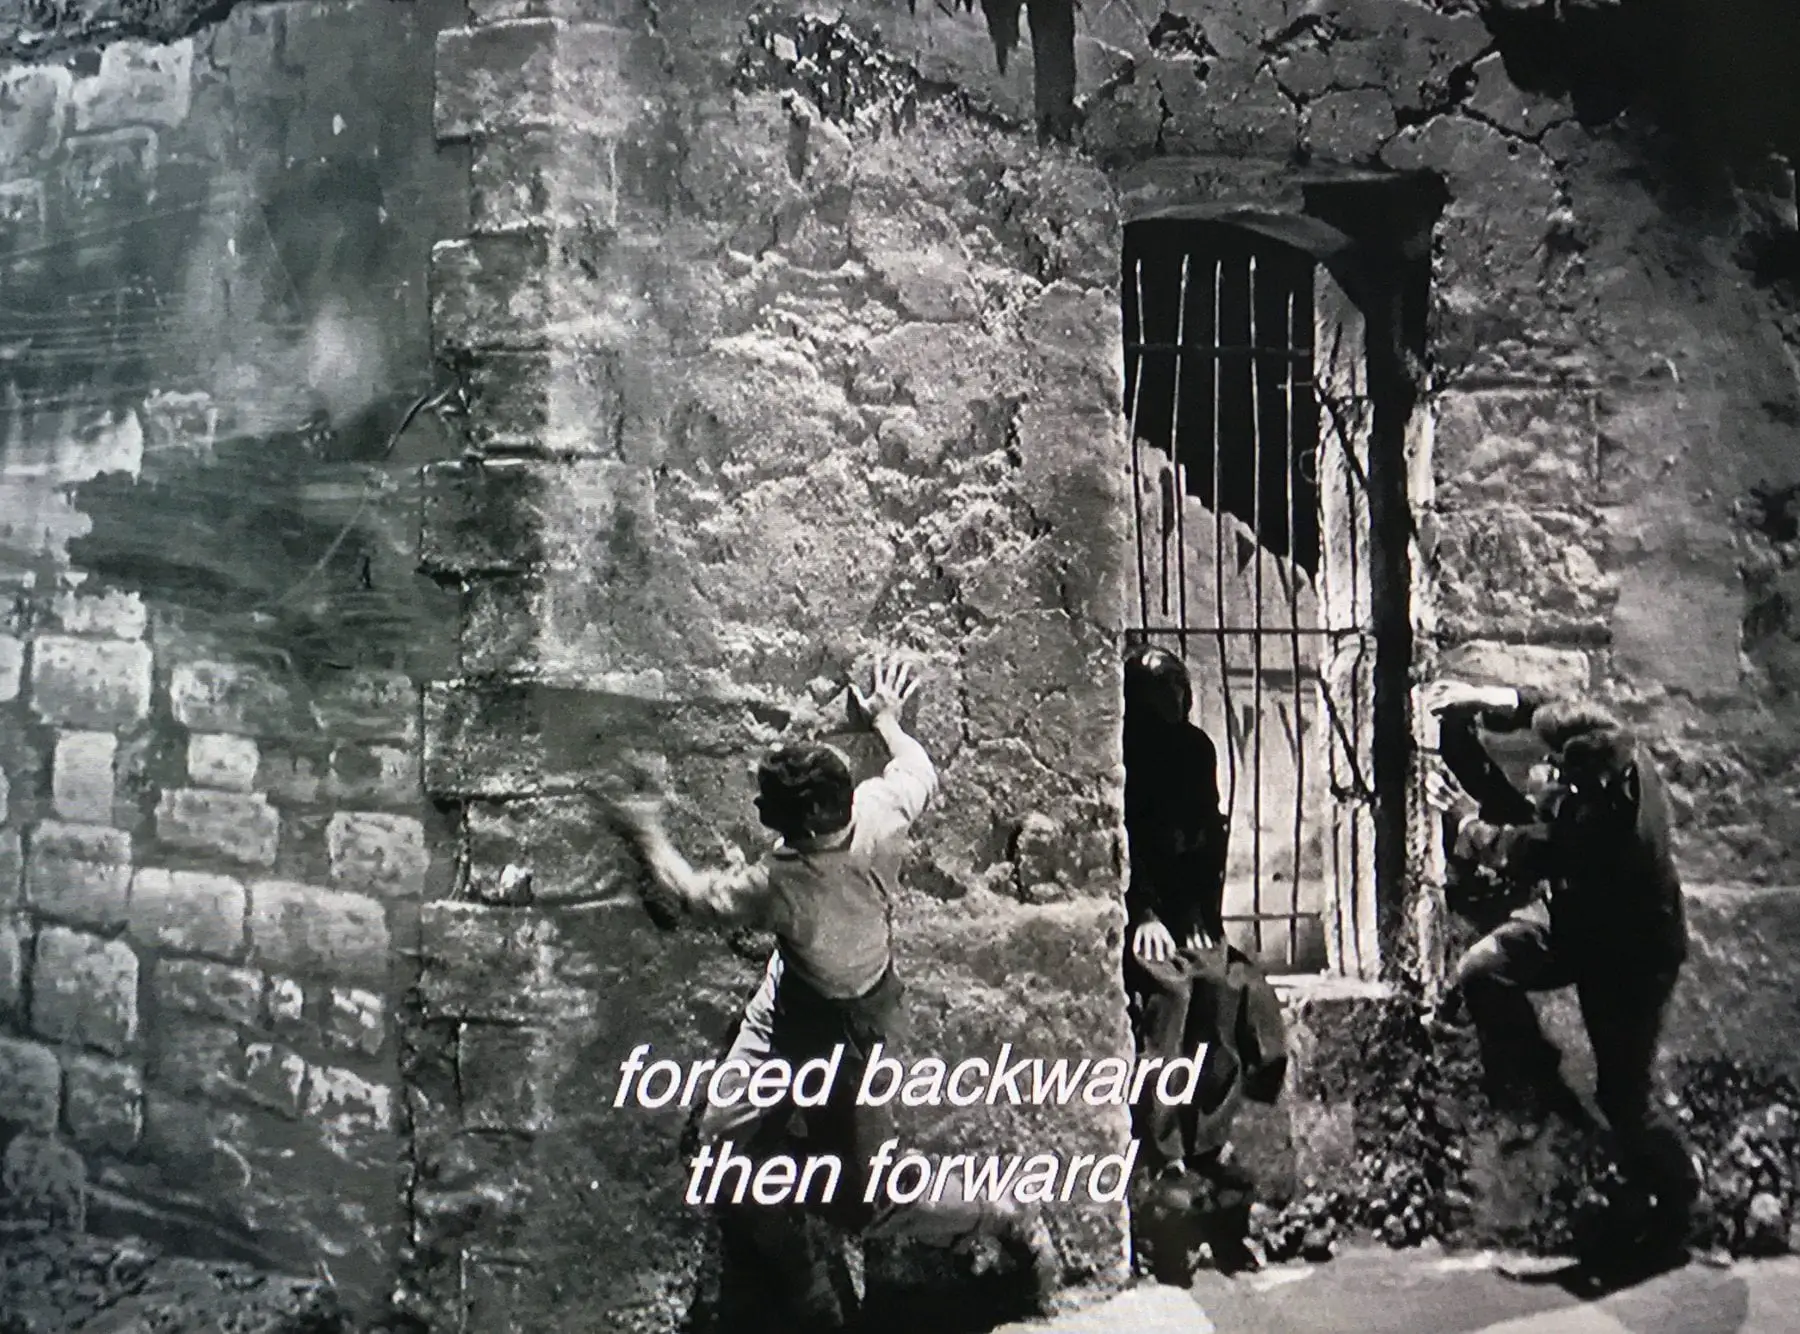 Cocteau references his first film, The Blood of a Poet